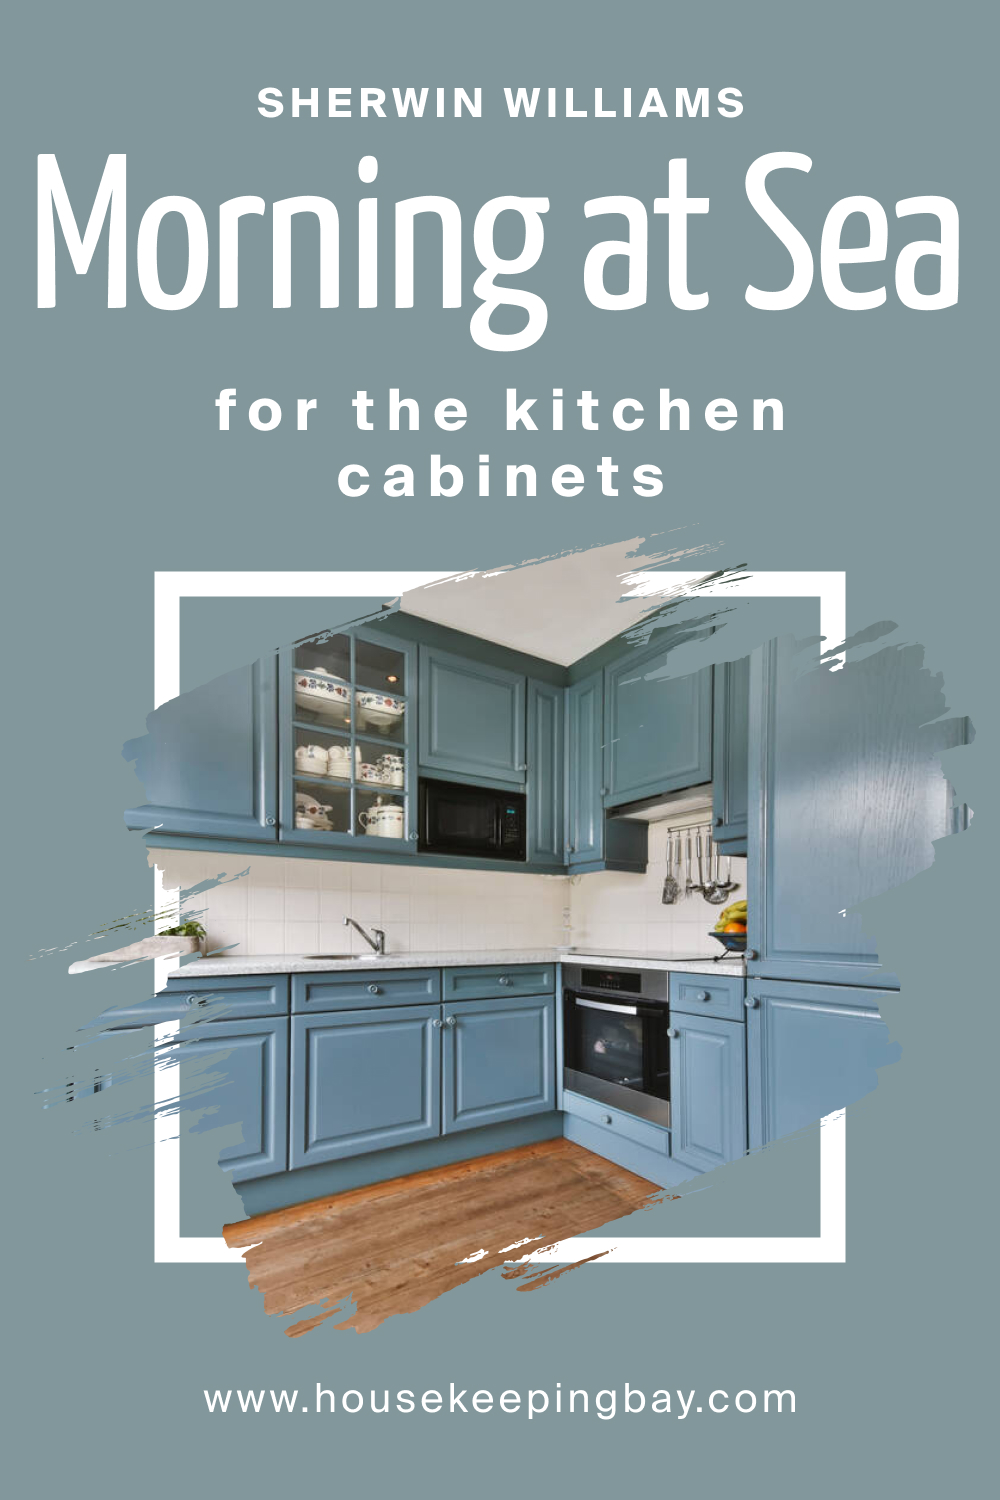 Sherwin Williams. SW 9634 Morning at Sea For the Kitchen Cabinets